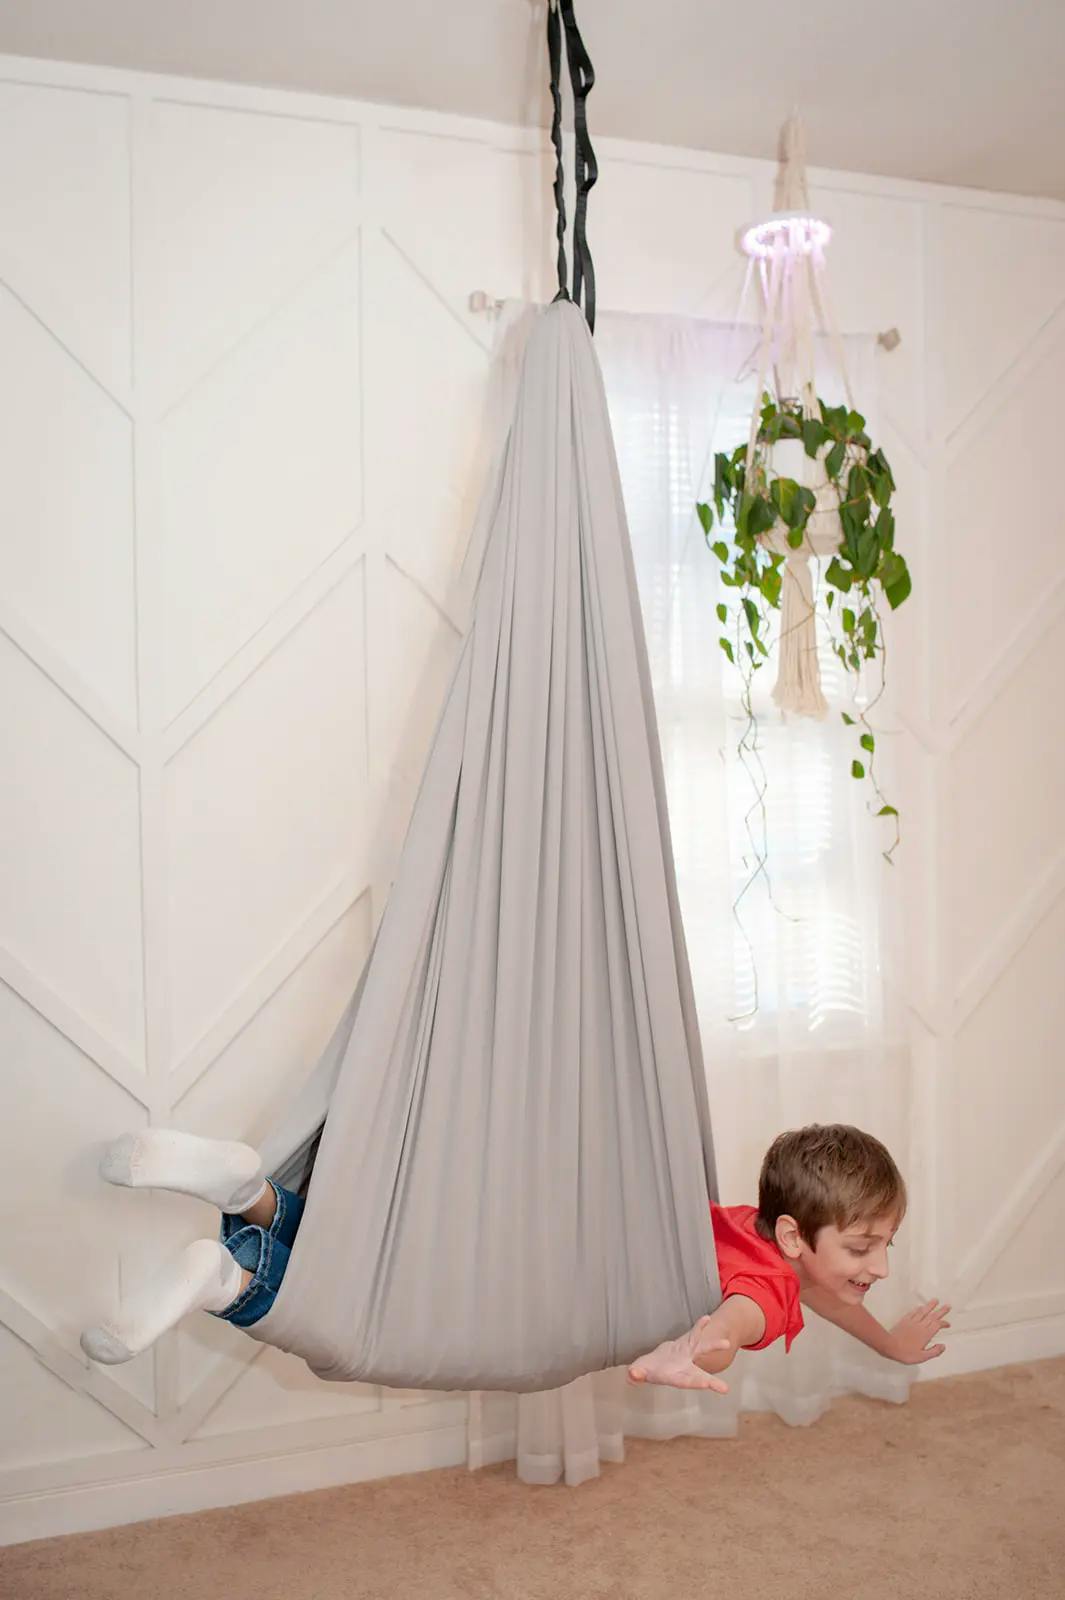 A child simulating flying in a Pebble sensory swing by 21st Sensory